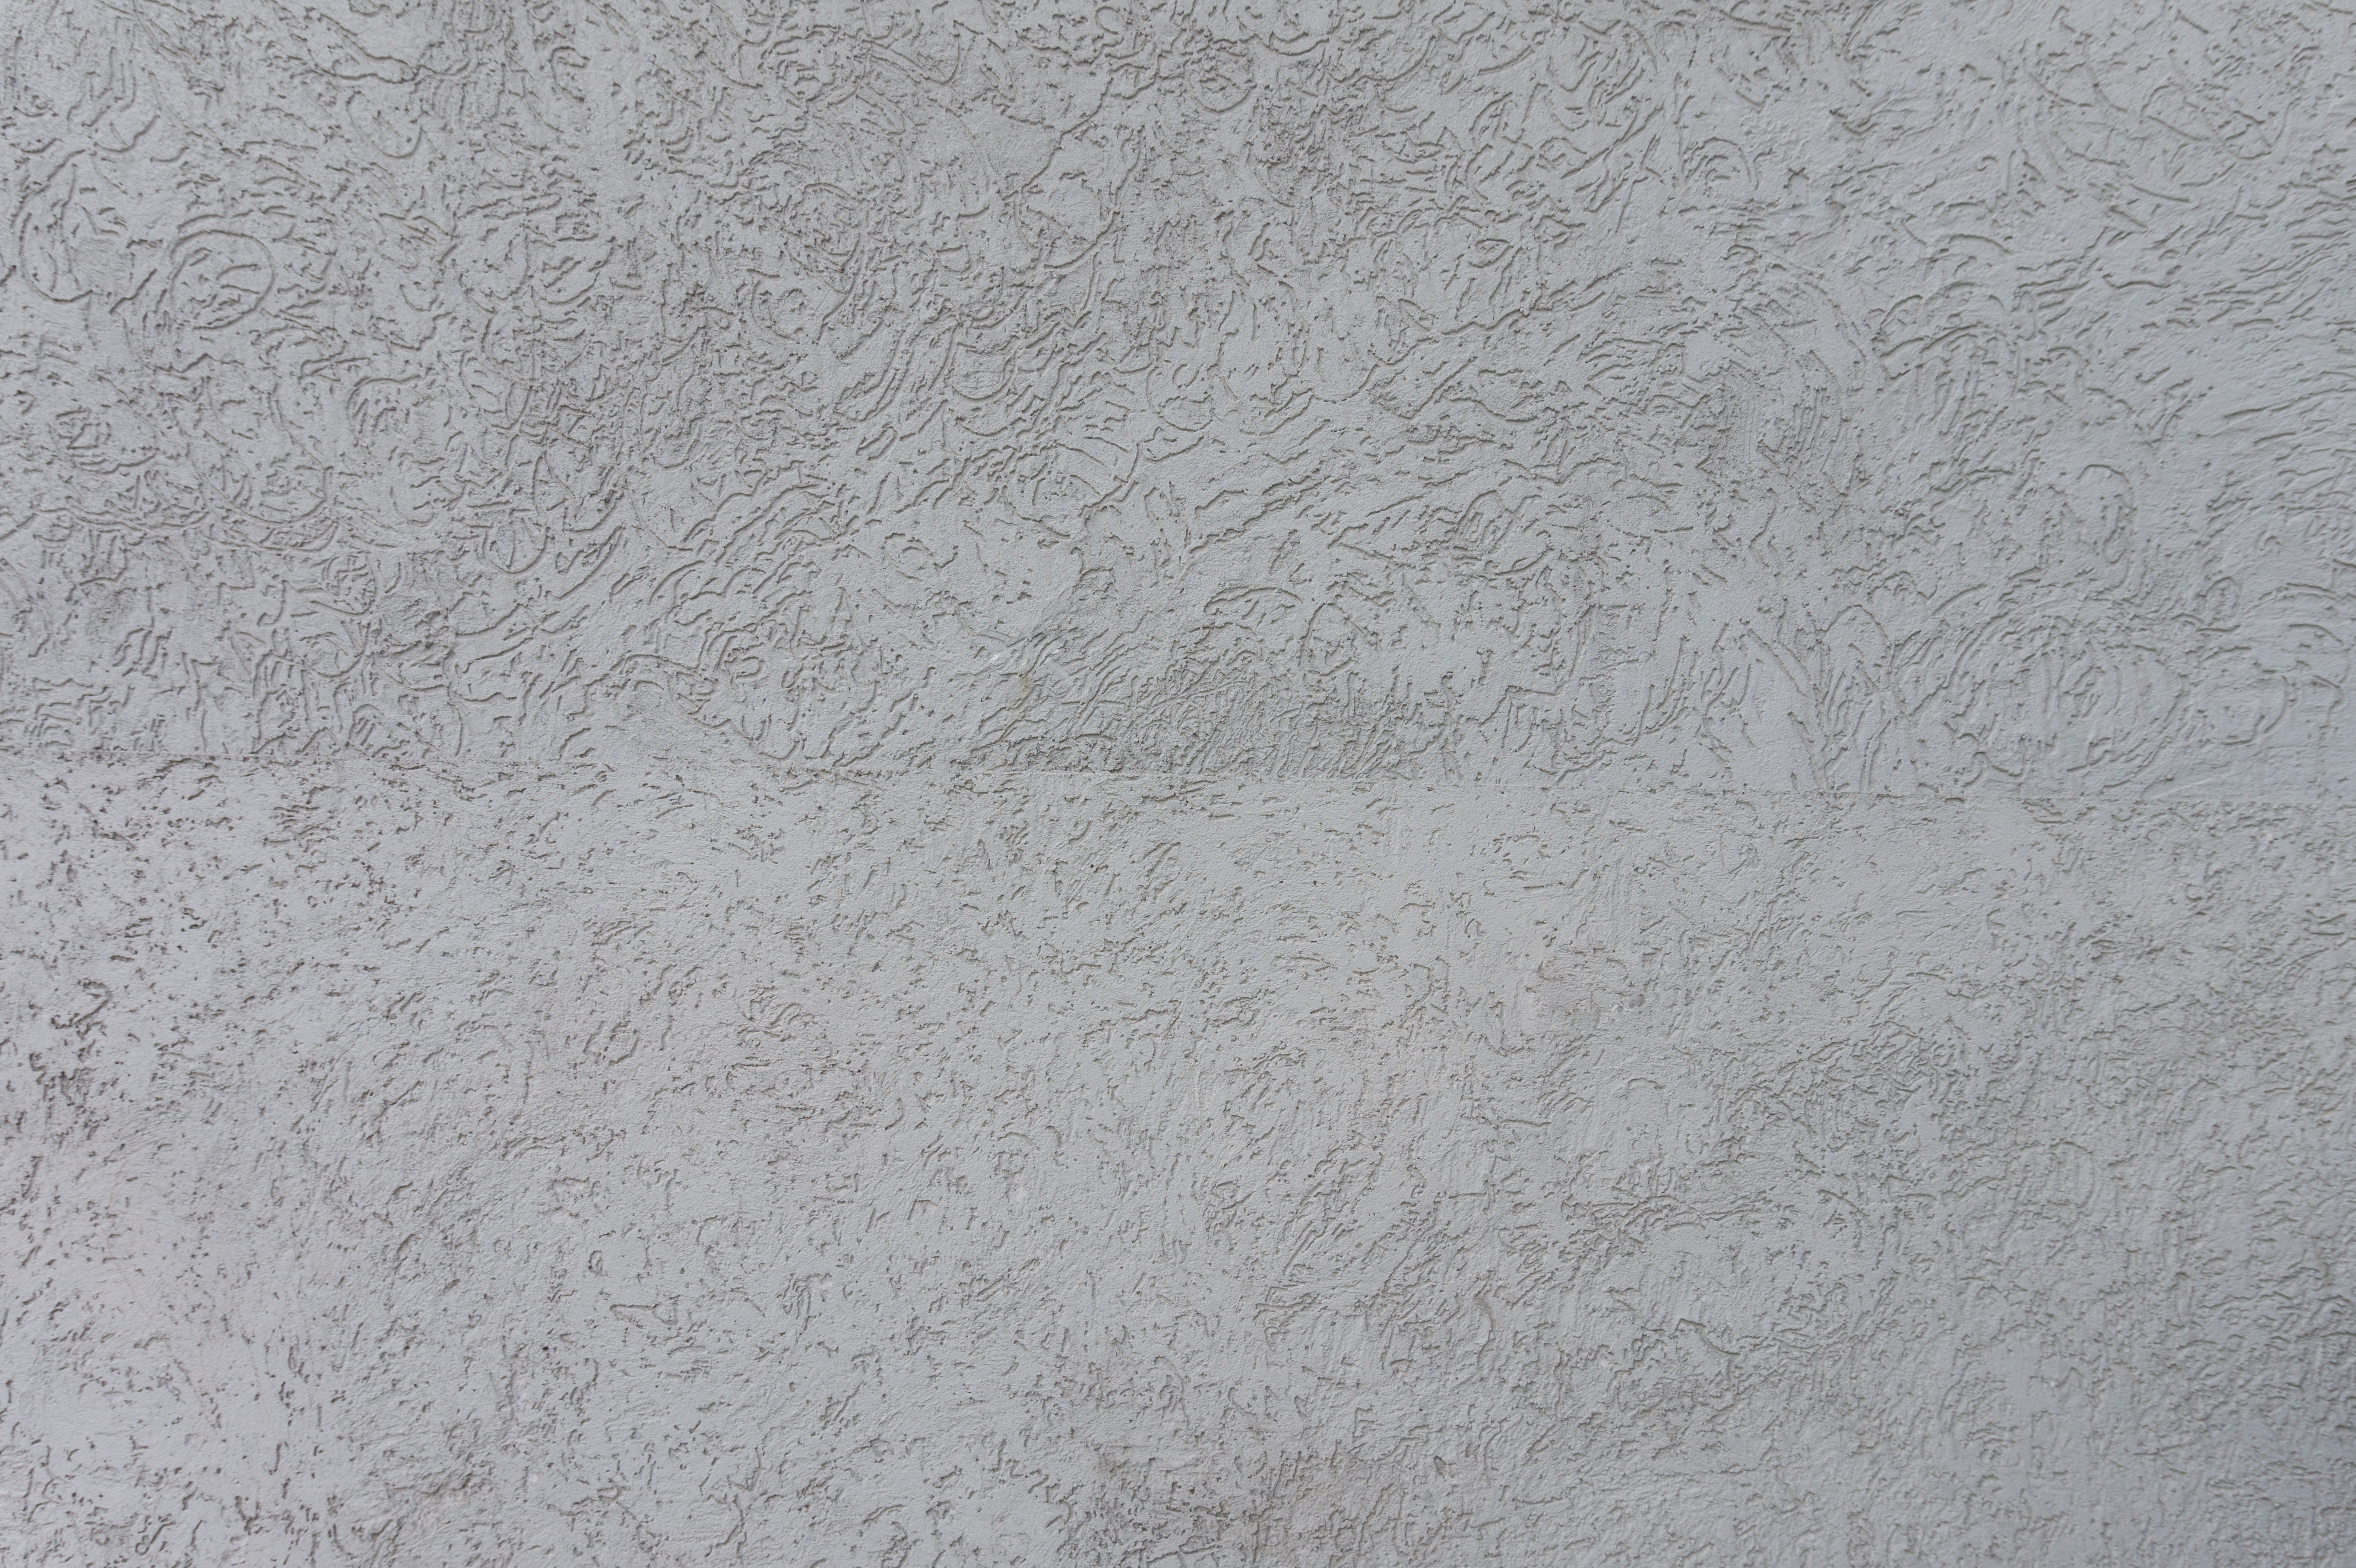 Slightly Patterned Plaster wall - Concrete - Texturify - Free textures